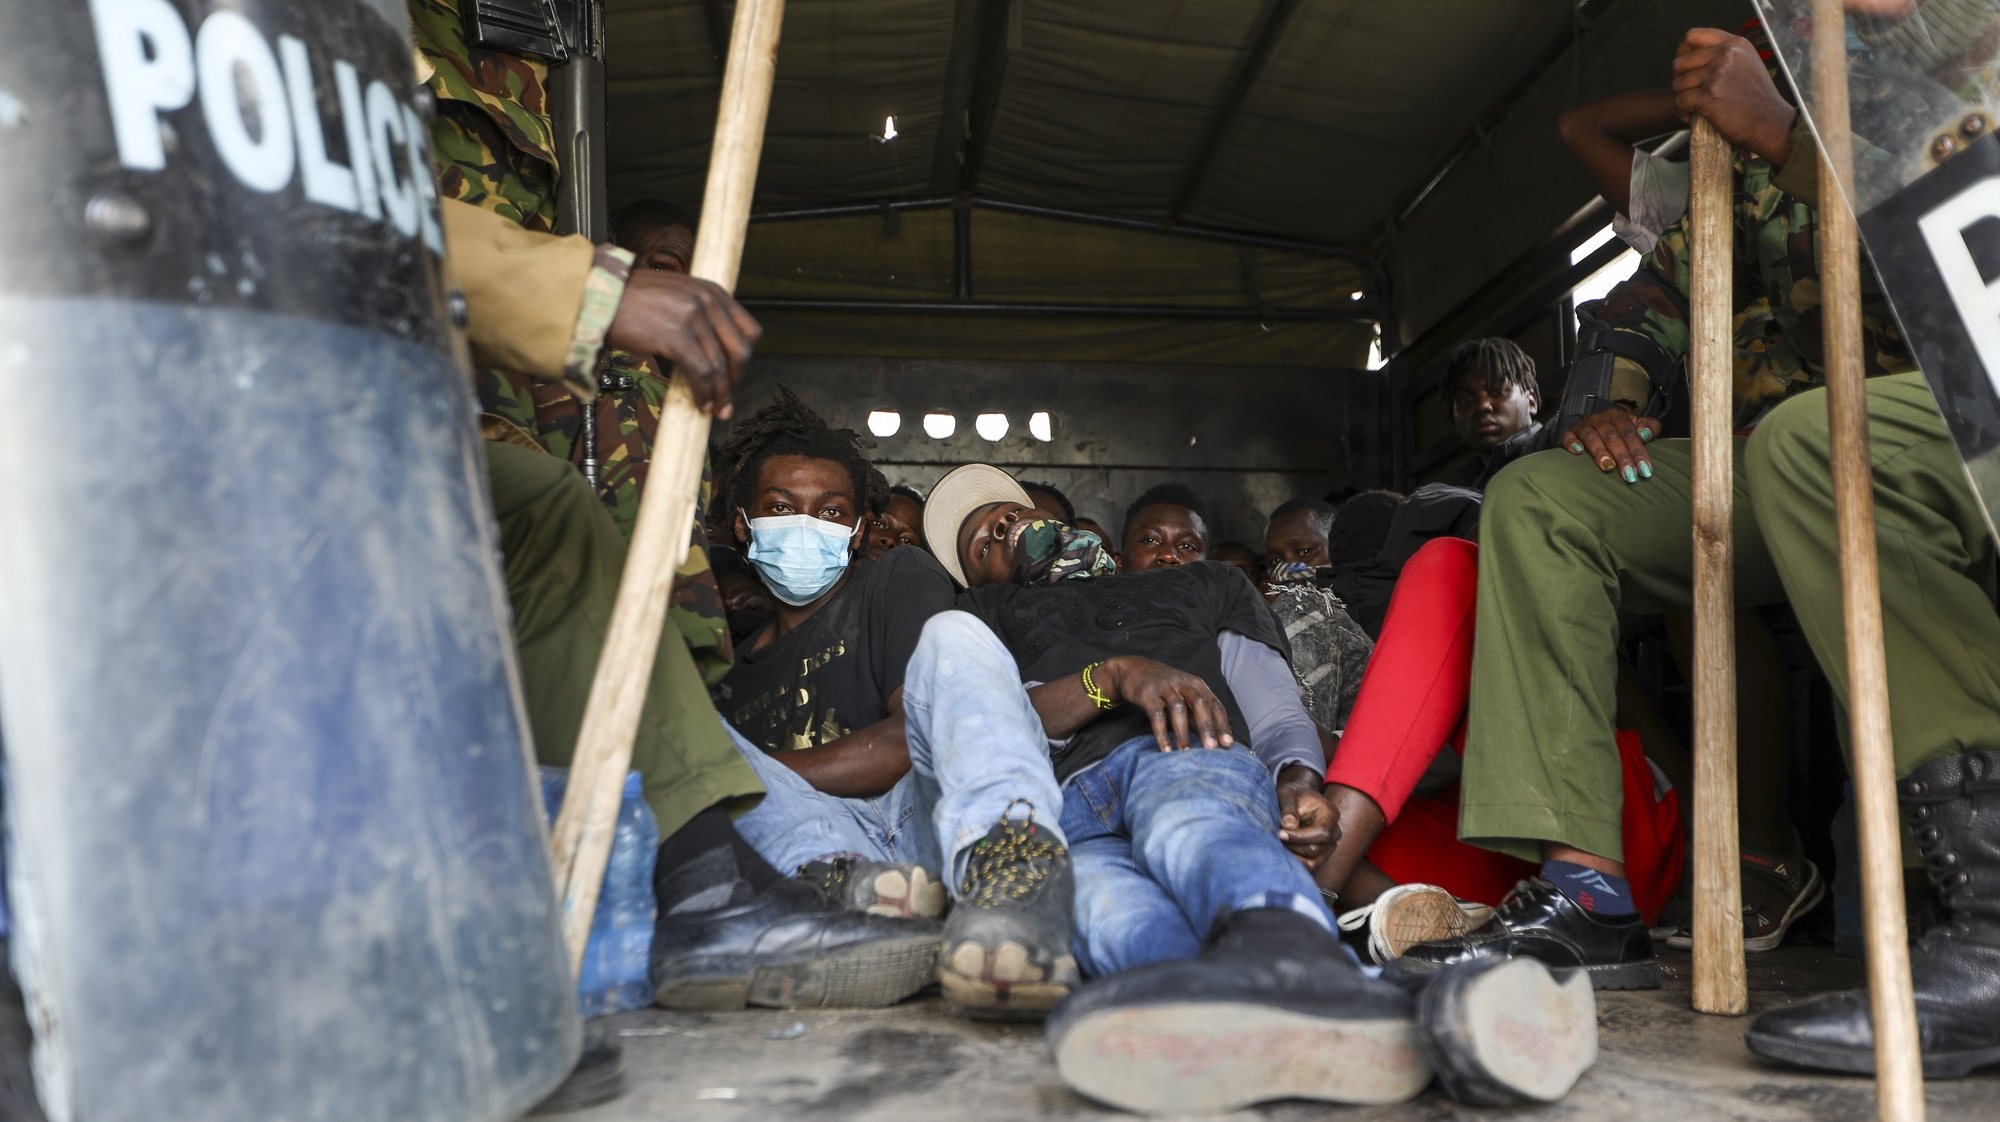 epa11453606 People sit in a police truck after being detained by police during an anti-government rally in Nairobi, Kenya, 02 July 2024. Demonstrators took to the streets despite Kenyan President William Ruto&#039;s announcement on 26 June that he would not sign into law a finance bill proposing new tax hikes. According to the state-funded Kenya National Commission on Human Rights (KNCHR), at least 39 people have died and 361 were injured in protests against tax hikes countrywide.  EPA/DANIEL IRUNGU